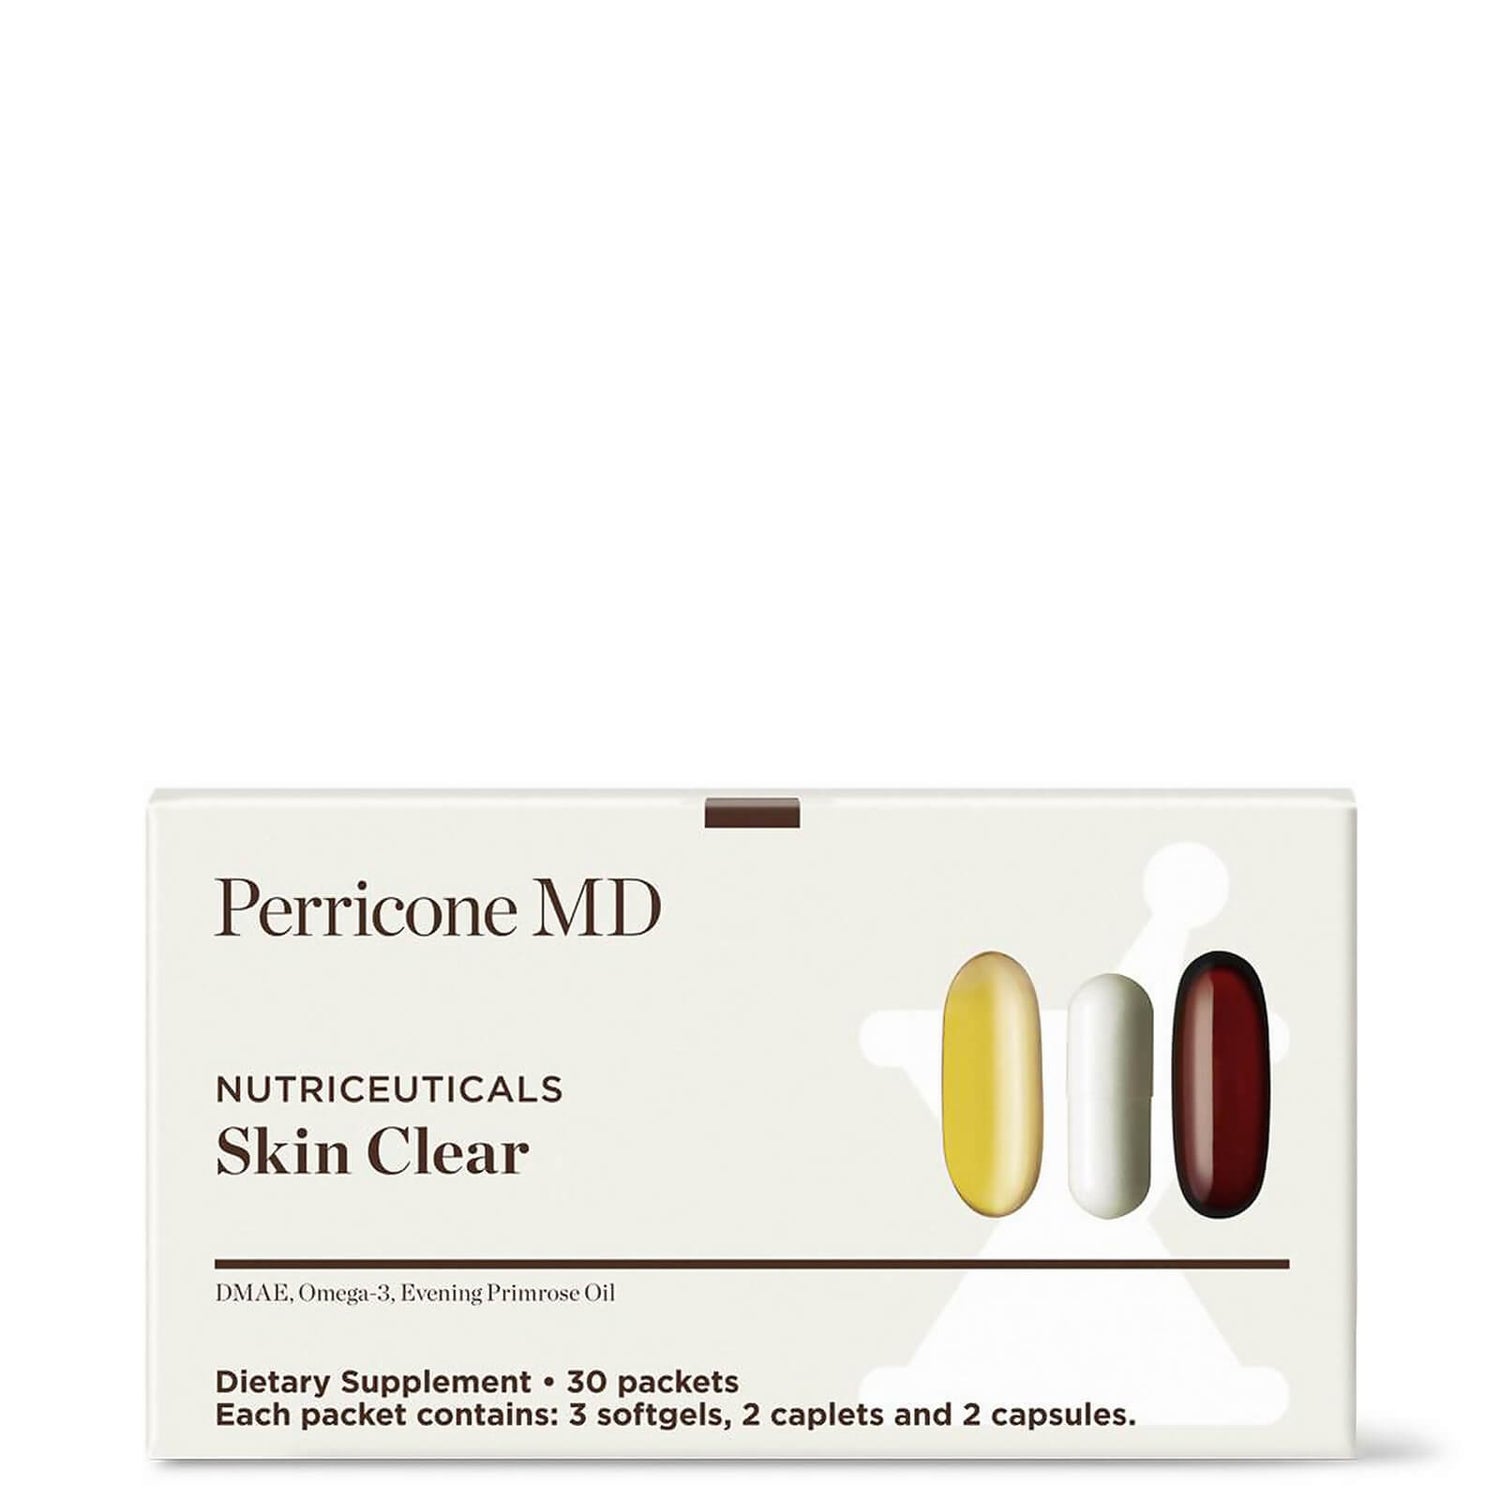 Perricone MD Skin Clear Supplements (30 count)